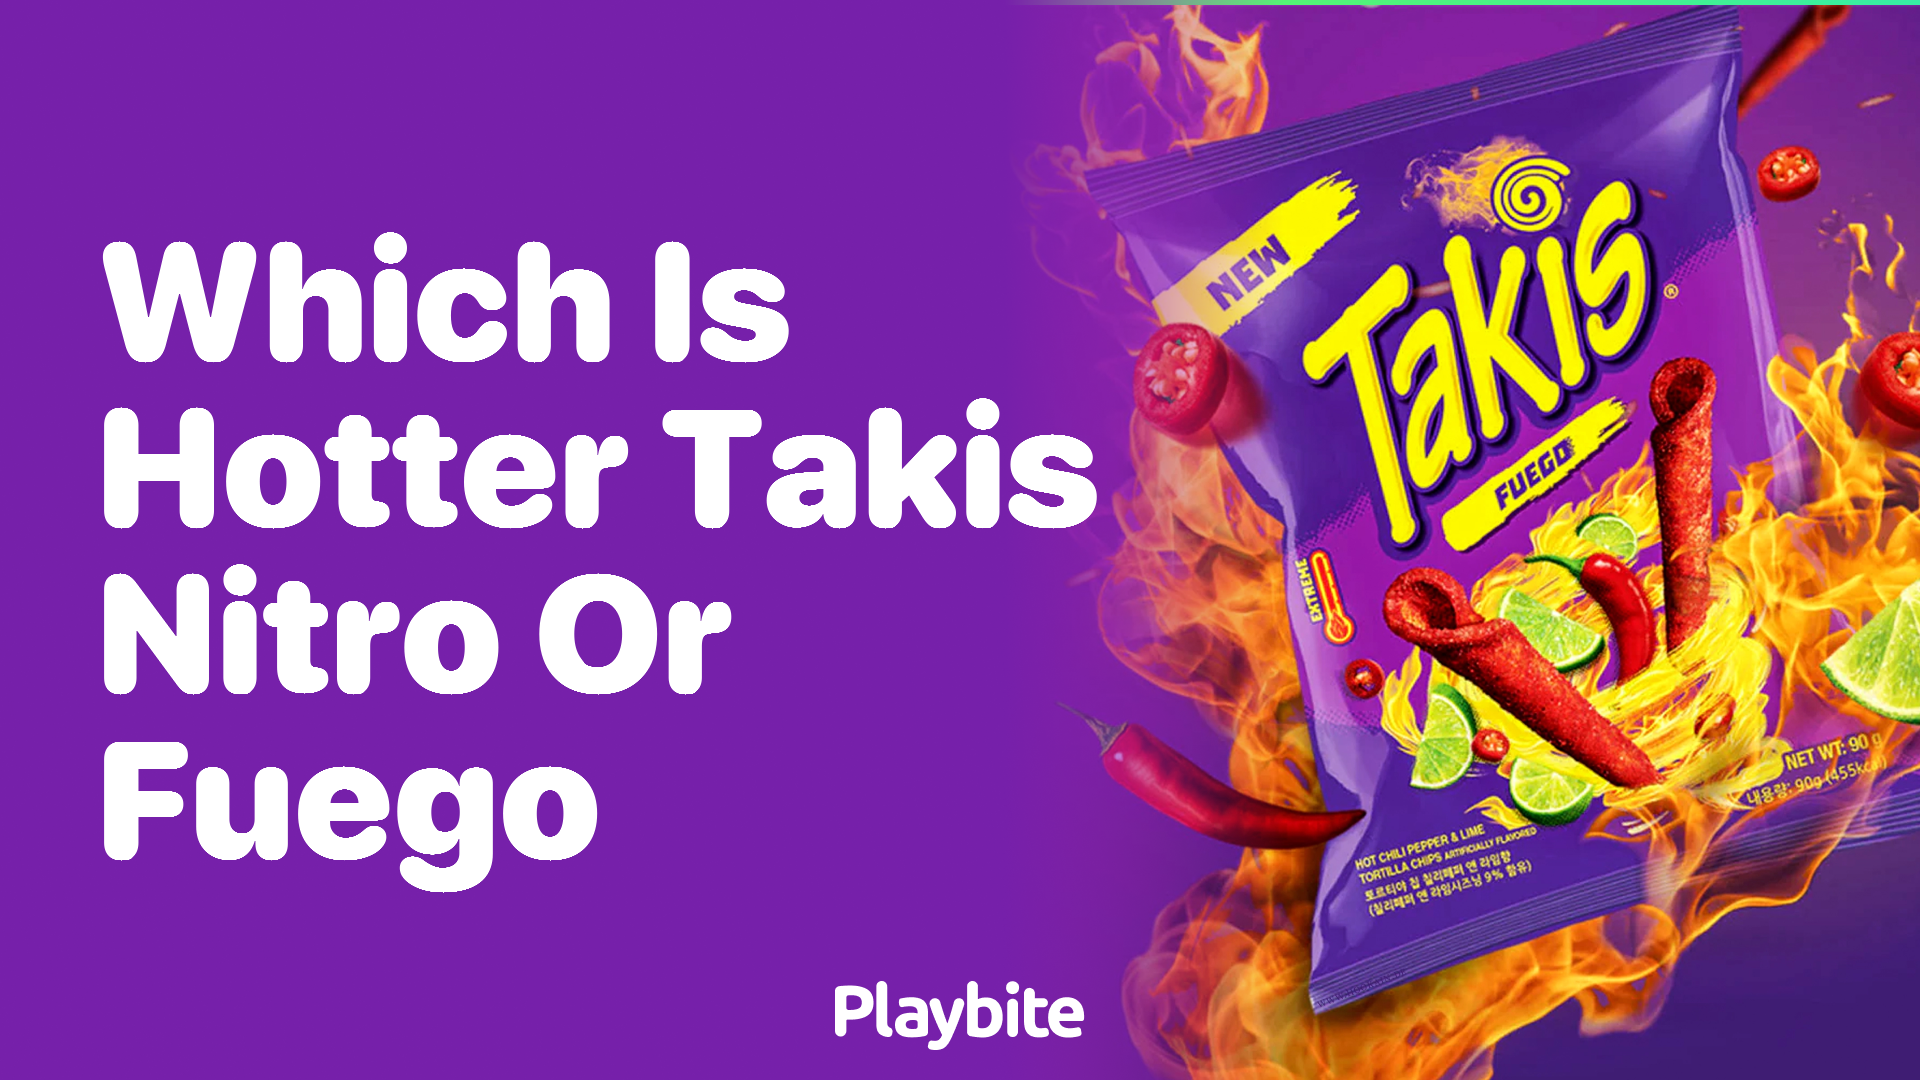 Which is Hotter: Takis Nitro or Fuego?